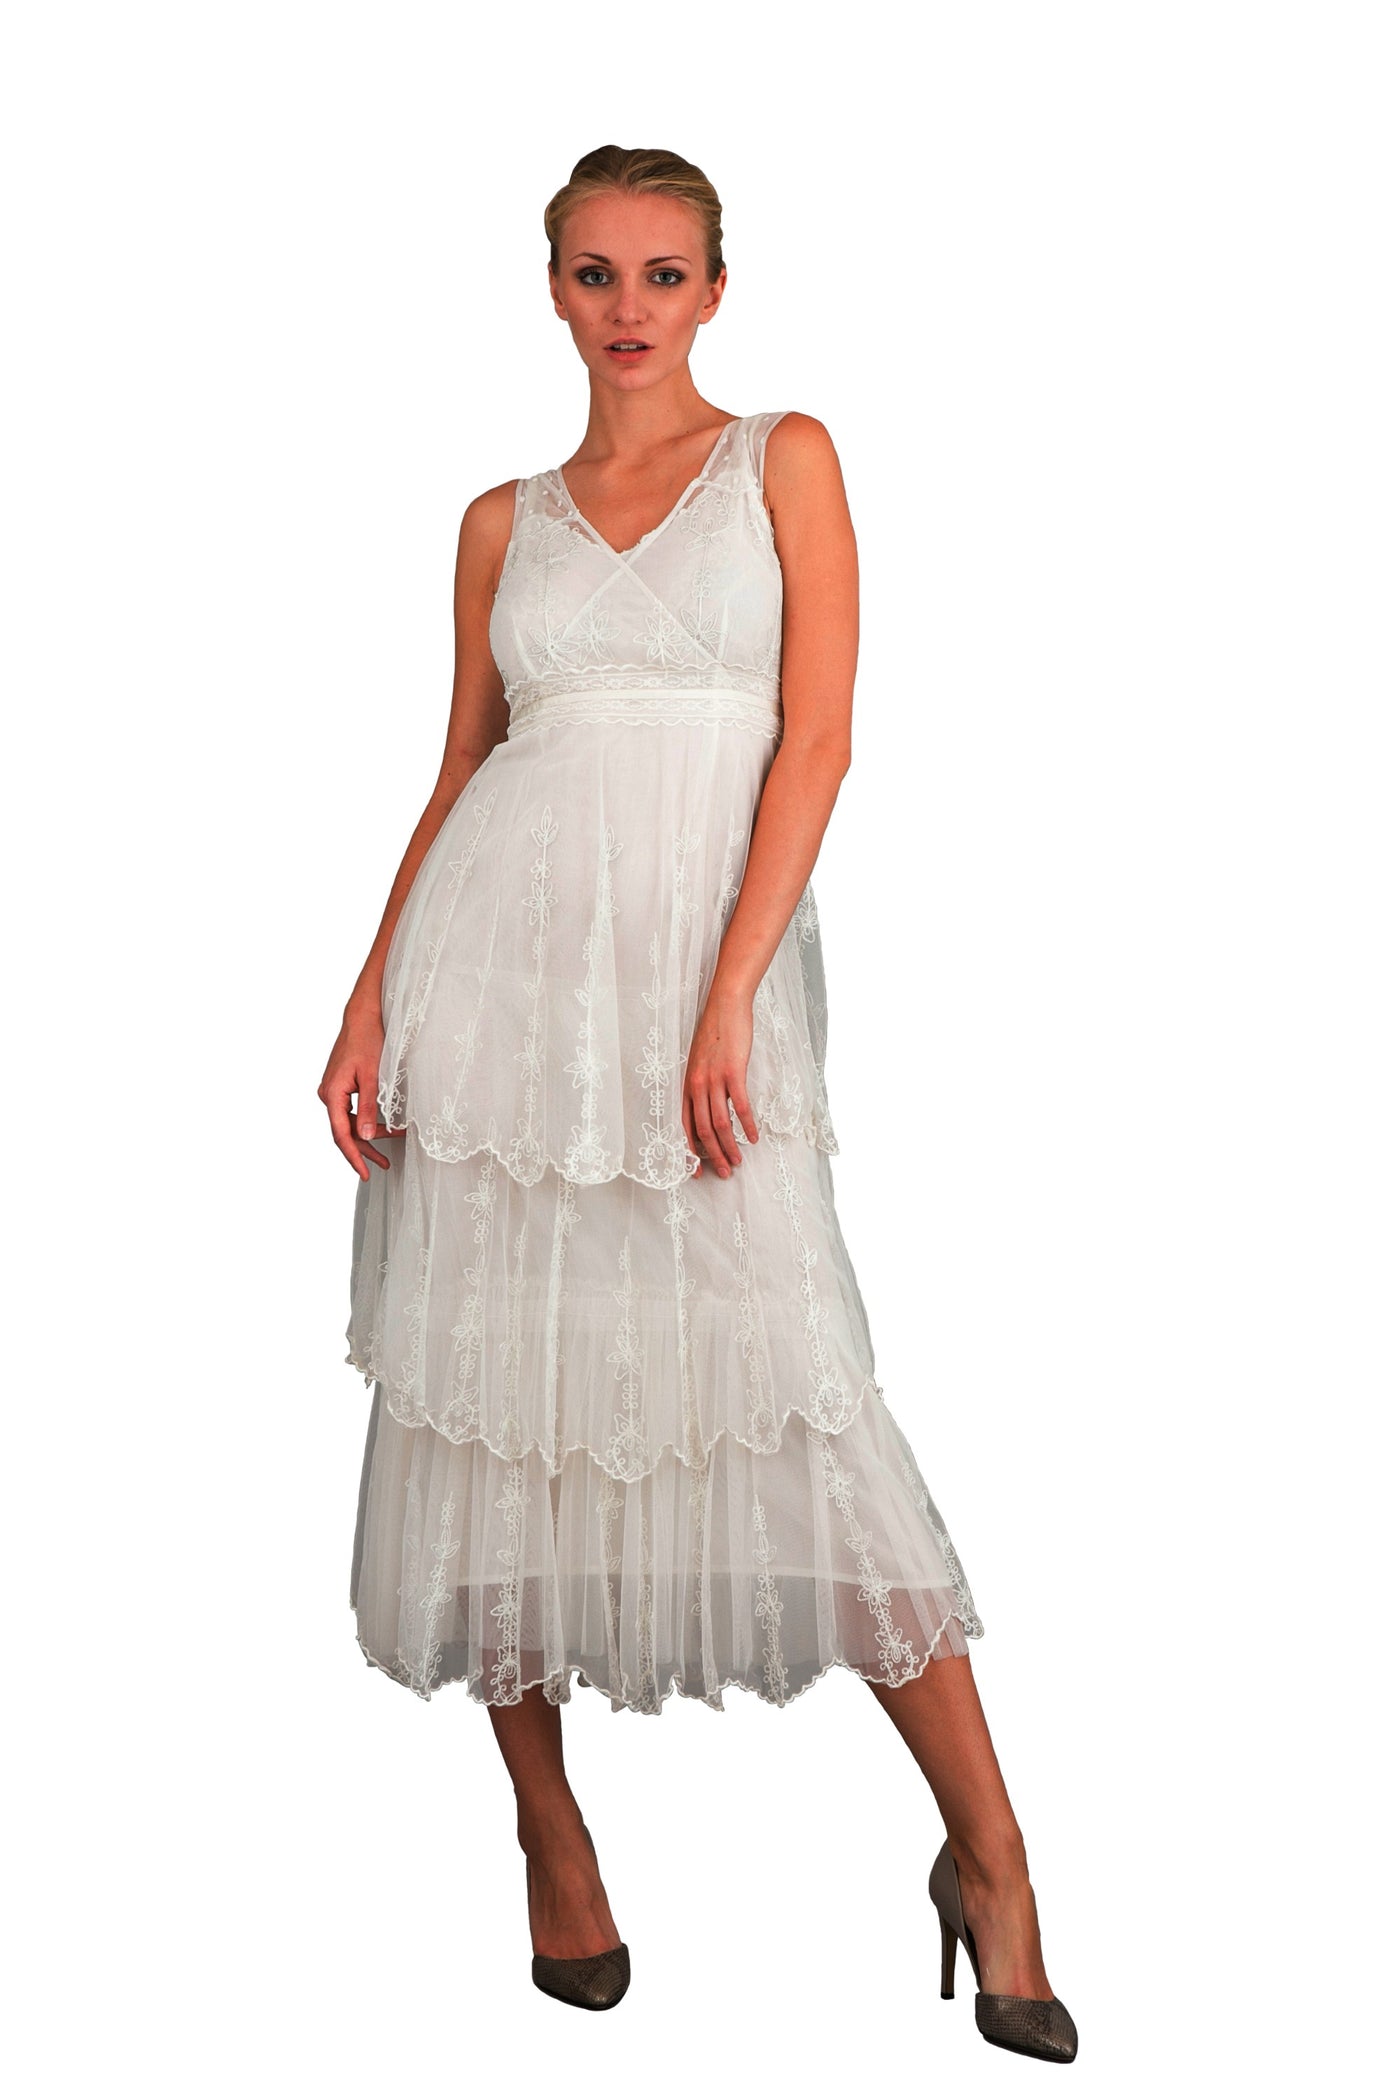 Vintage Inspired Empire Waist Party Dress in Ivory - SOLD OUT